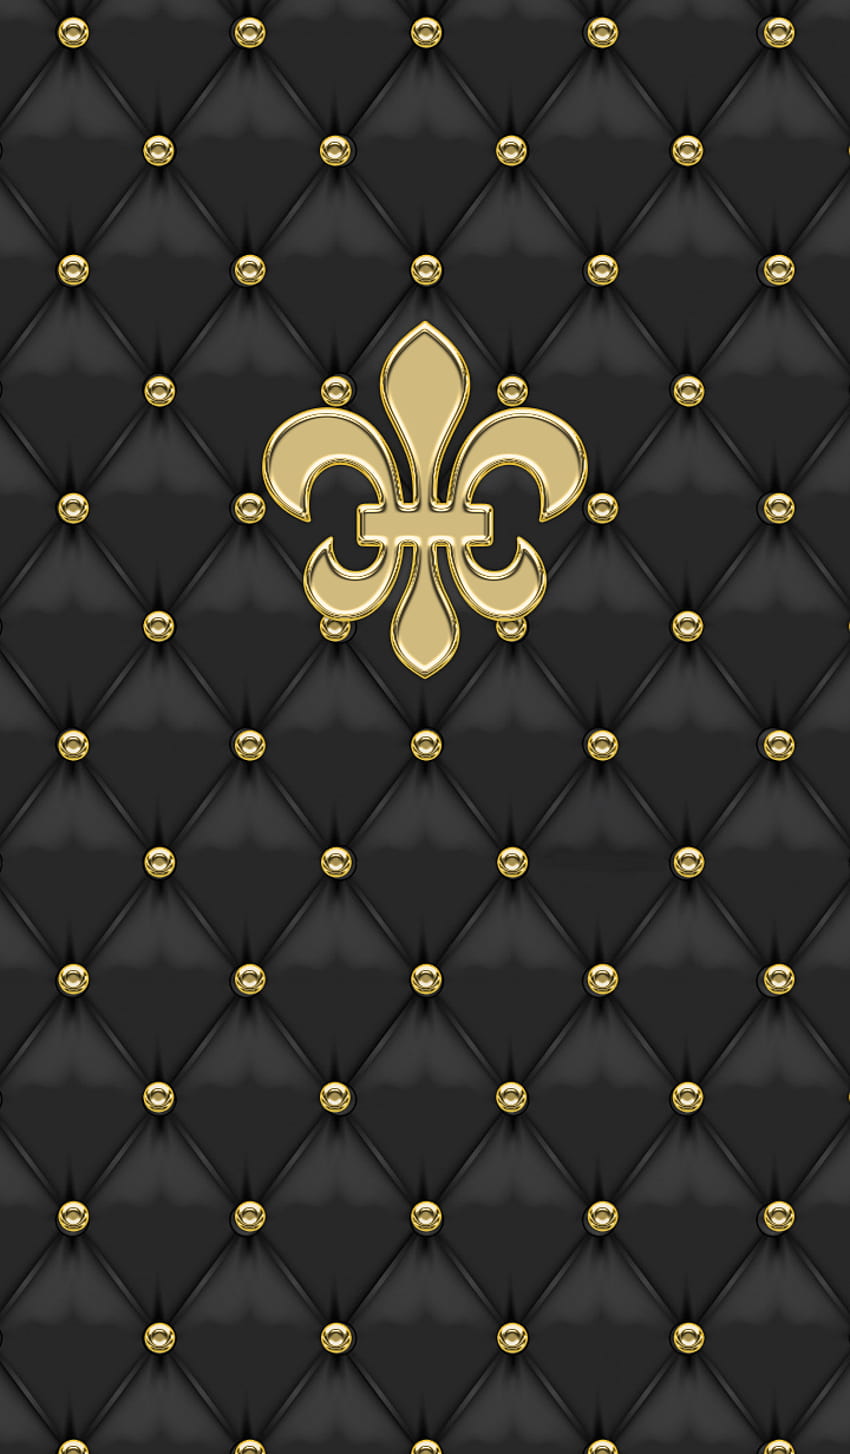 It is a luxury Theme with a black leather gold., luxury leather HD phone wallpaper